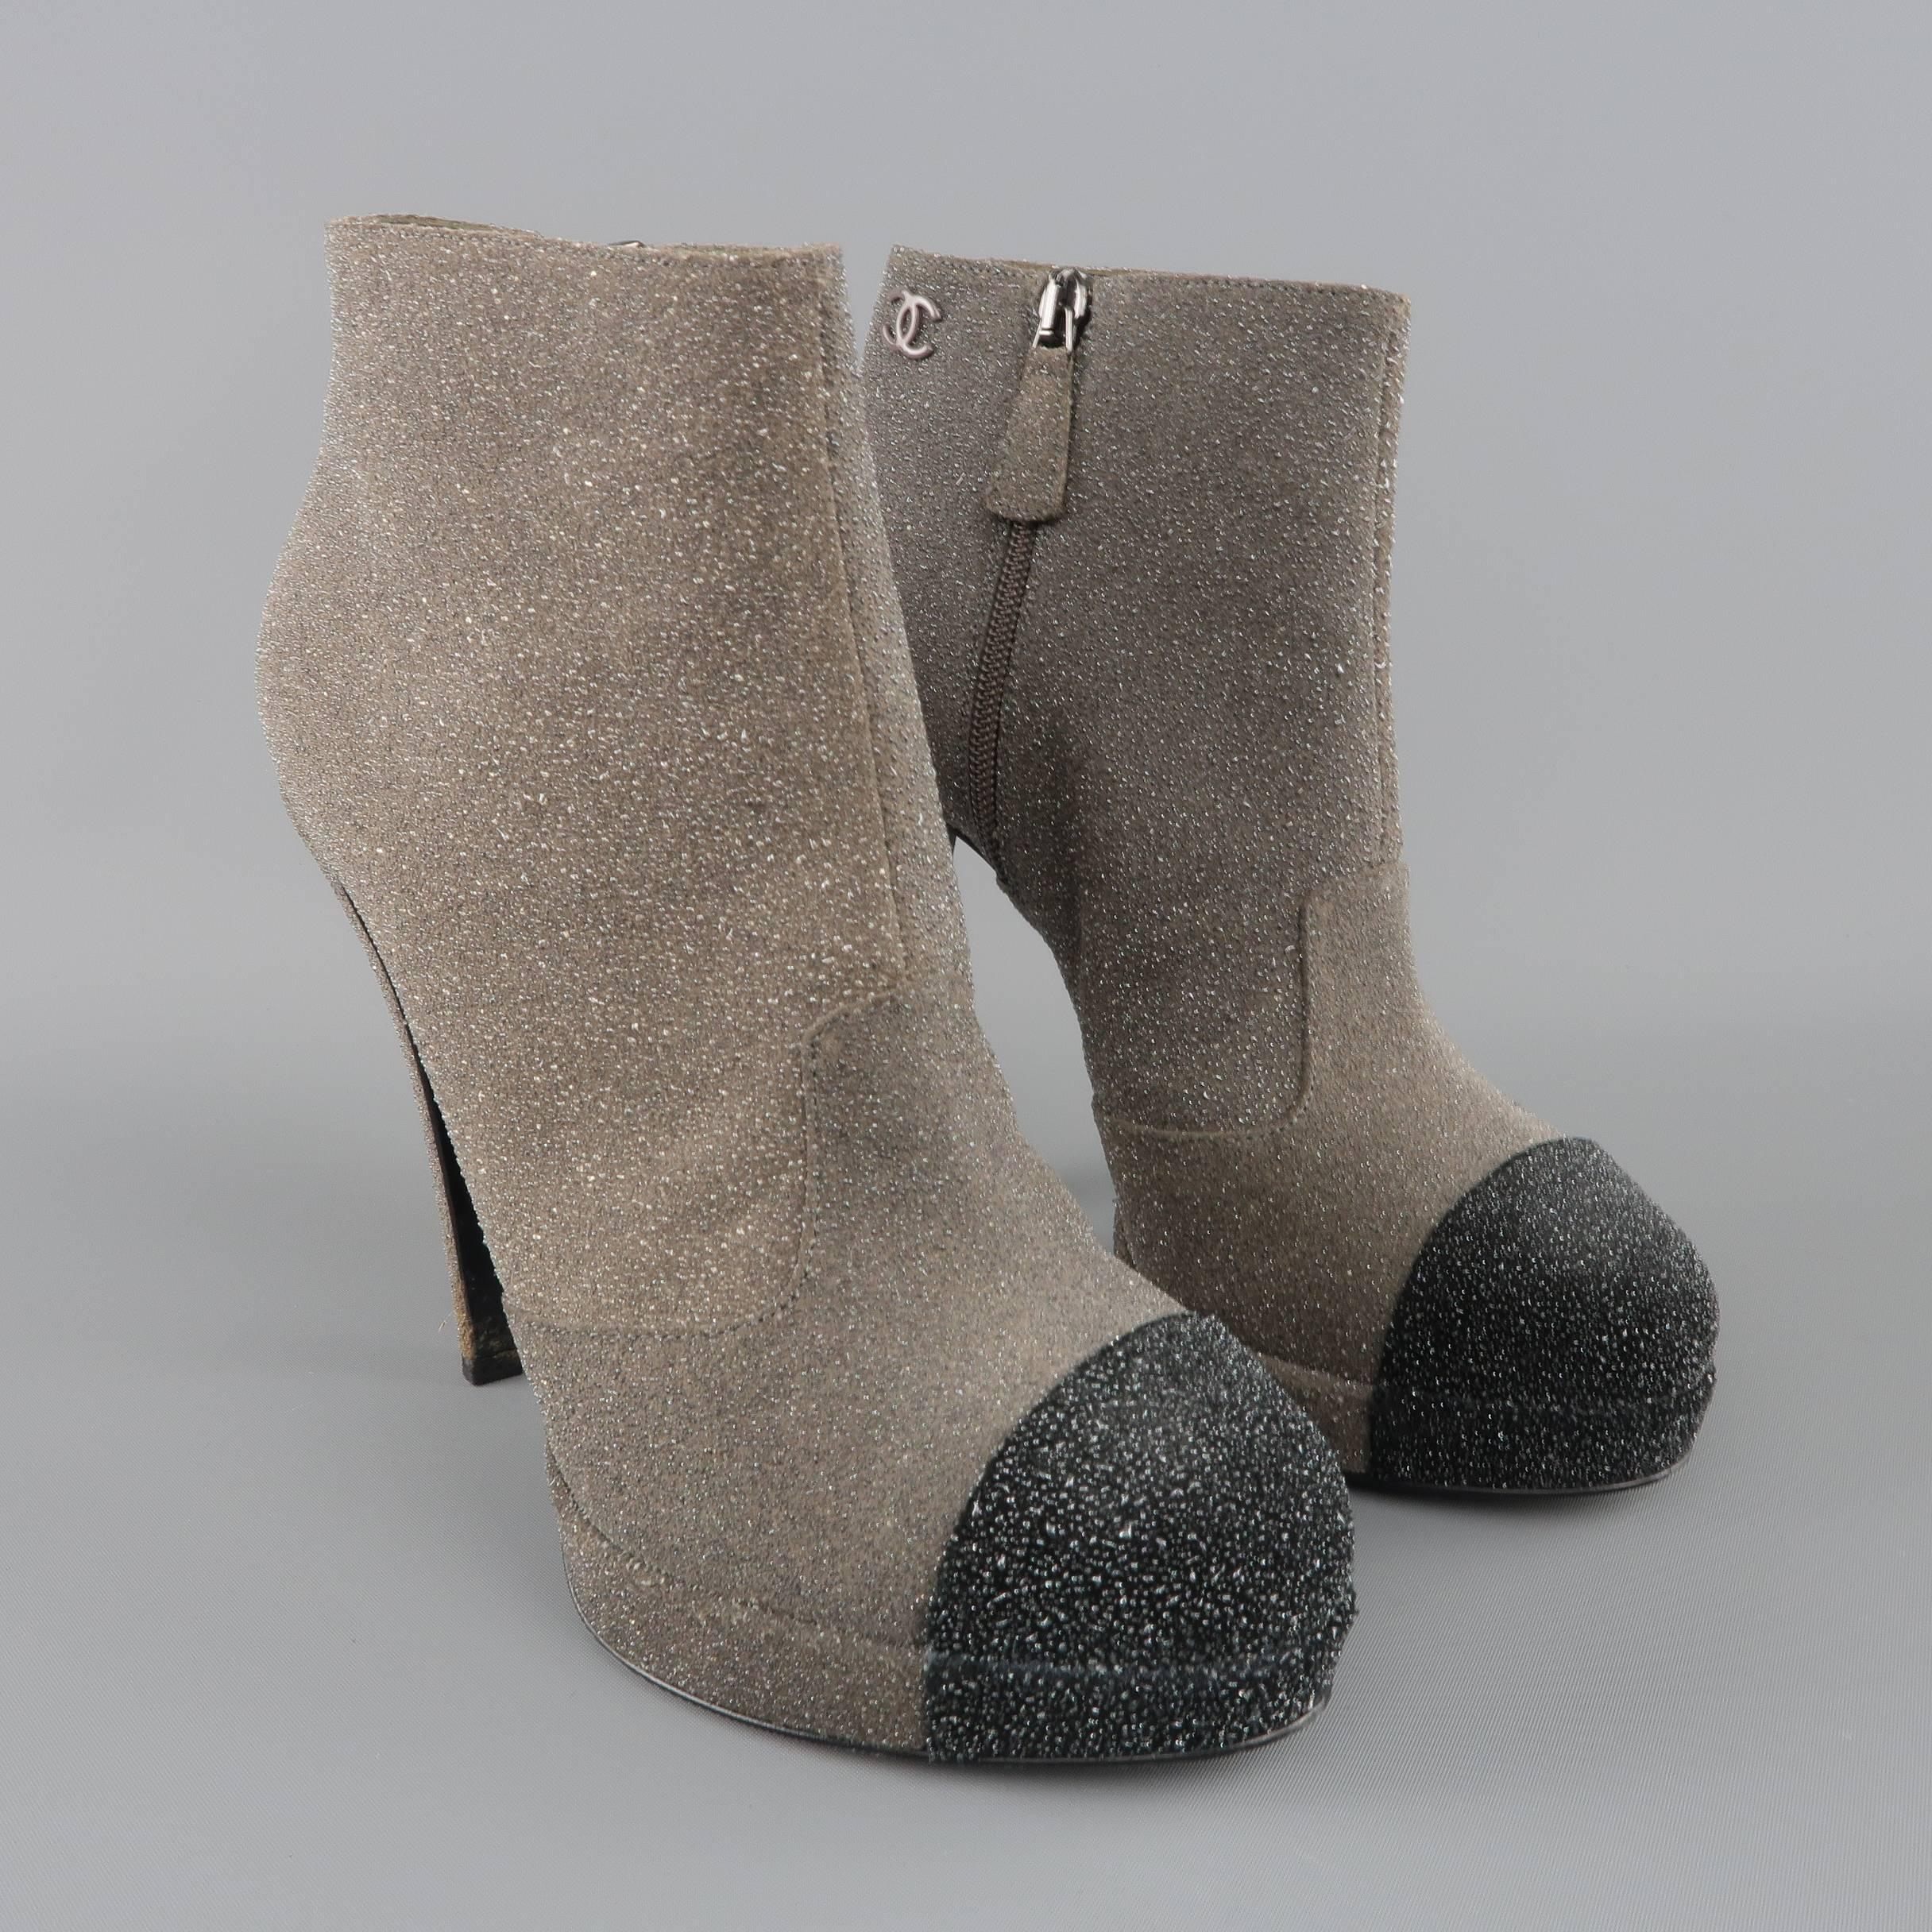 CHANEL ankle booties come in a unique sparkle encrusted taupe suede and feature a black toe cap, covered platform, structural stiletto heel, and CC logo. Made in Italy.
 
Good Pre-Owned Condition.
Marked: IT 38.5
 
Measurements:
 
Heel: 5.25